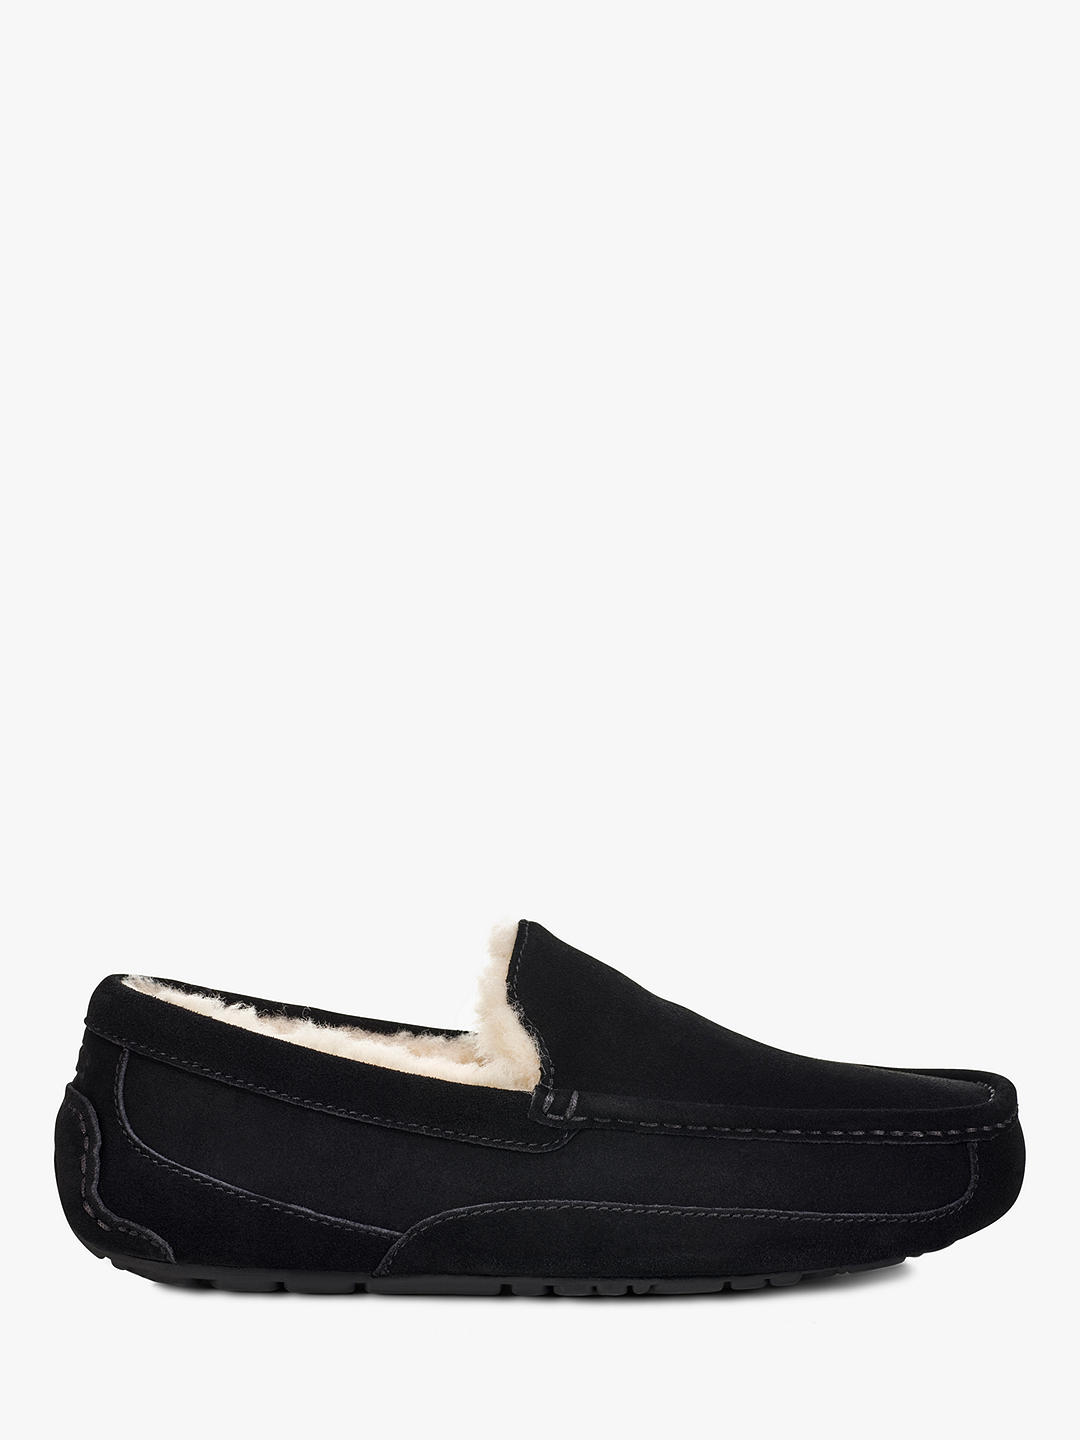 UGG Ascot Moccasin Suede Slippers, Black at John Lewis & Partners